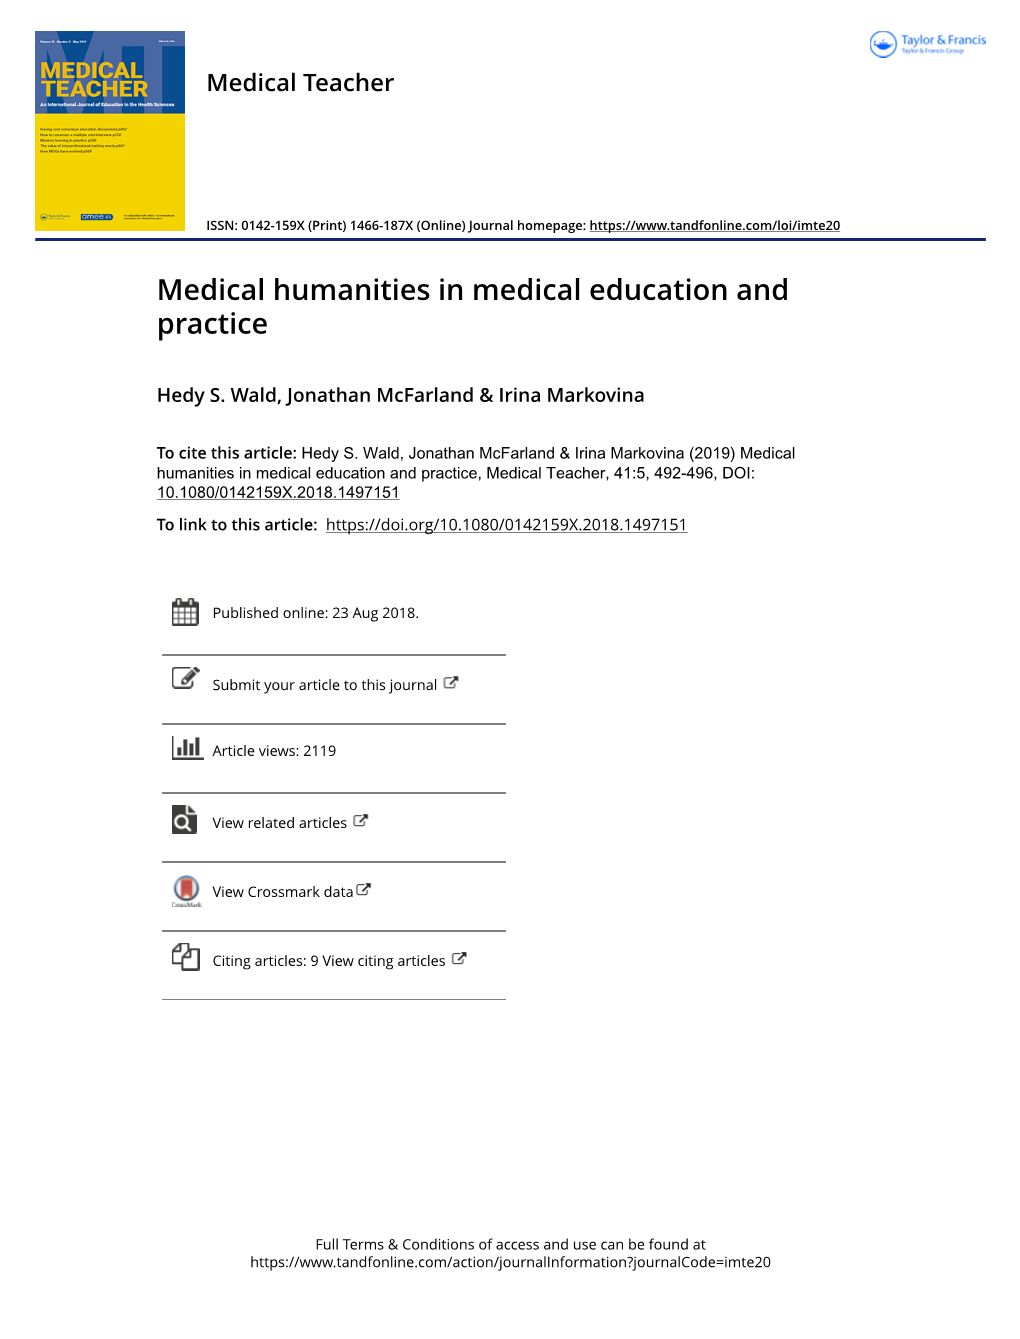 Medical Humanities in Medical Education and Practice